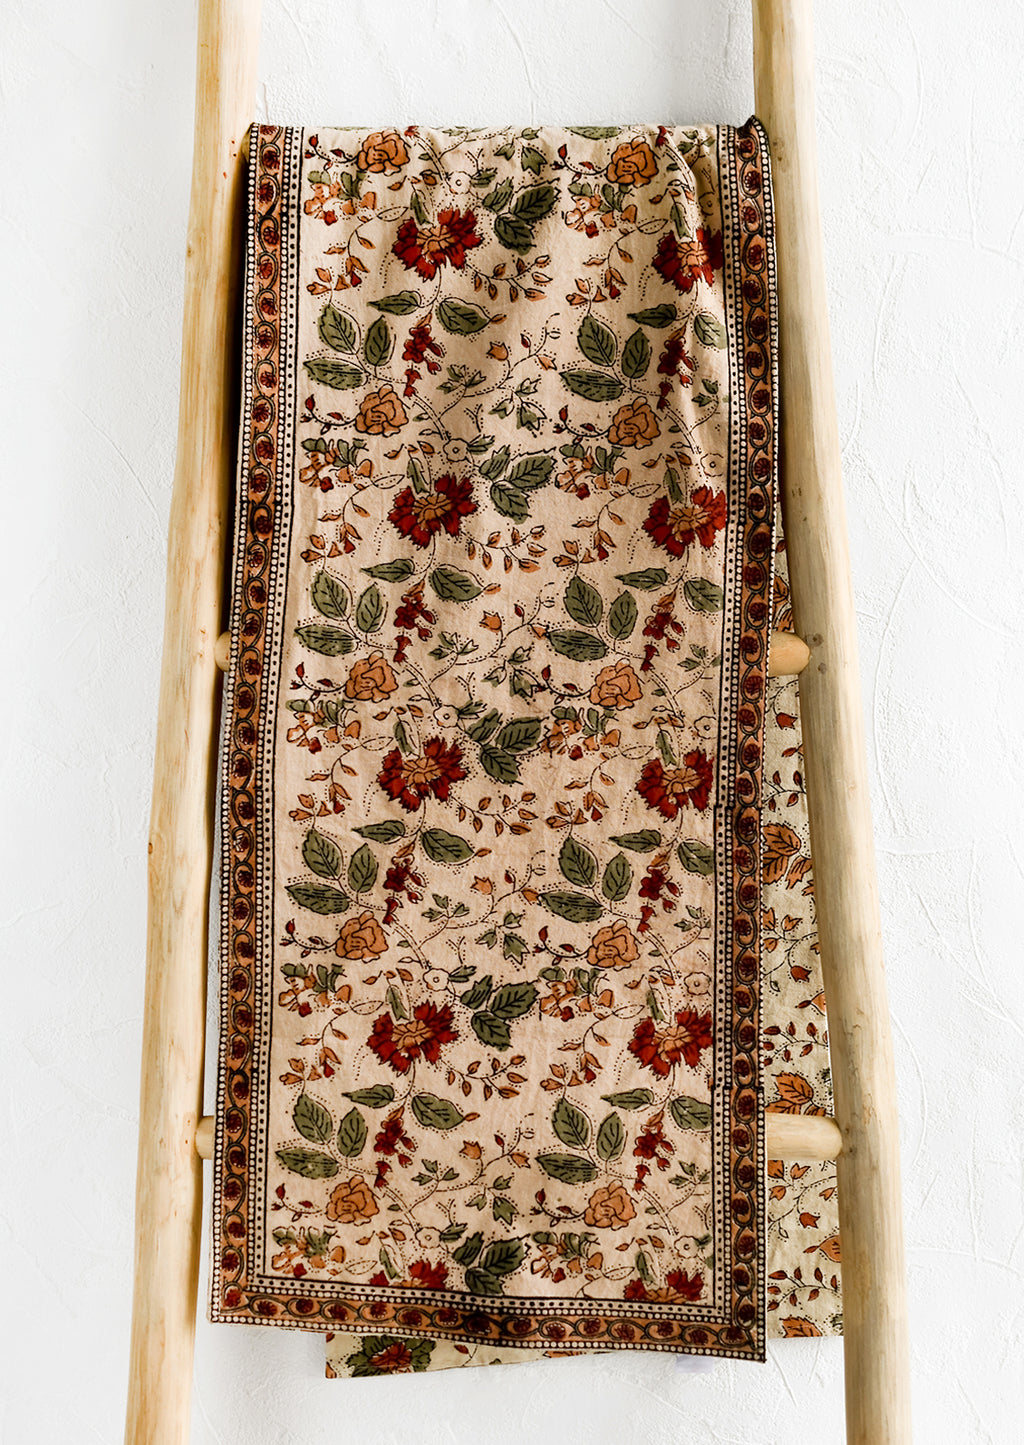 1: A block printed table runner in crimson, green and beige floral print.